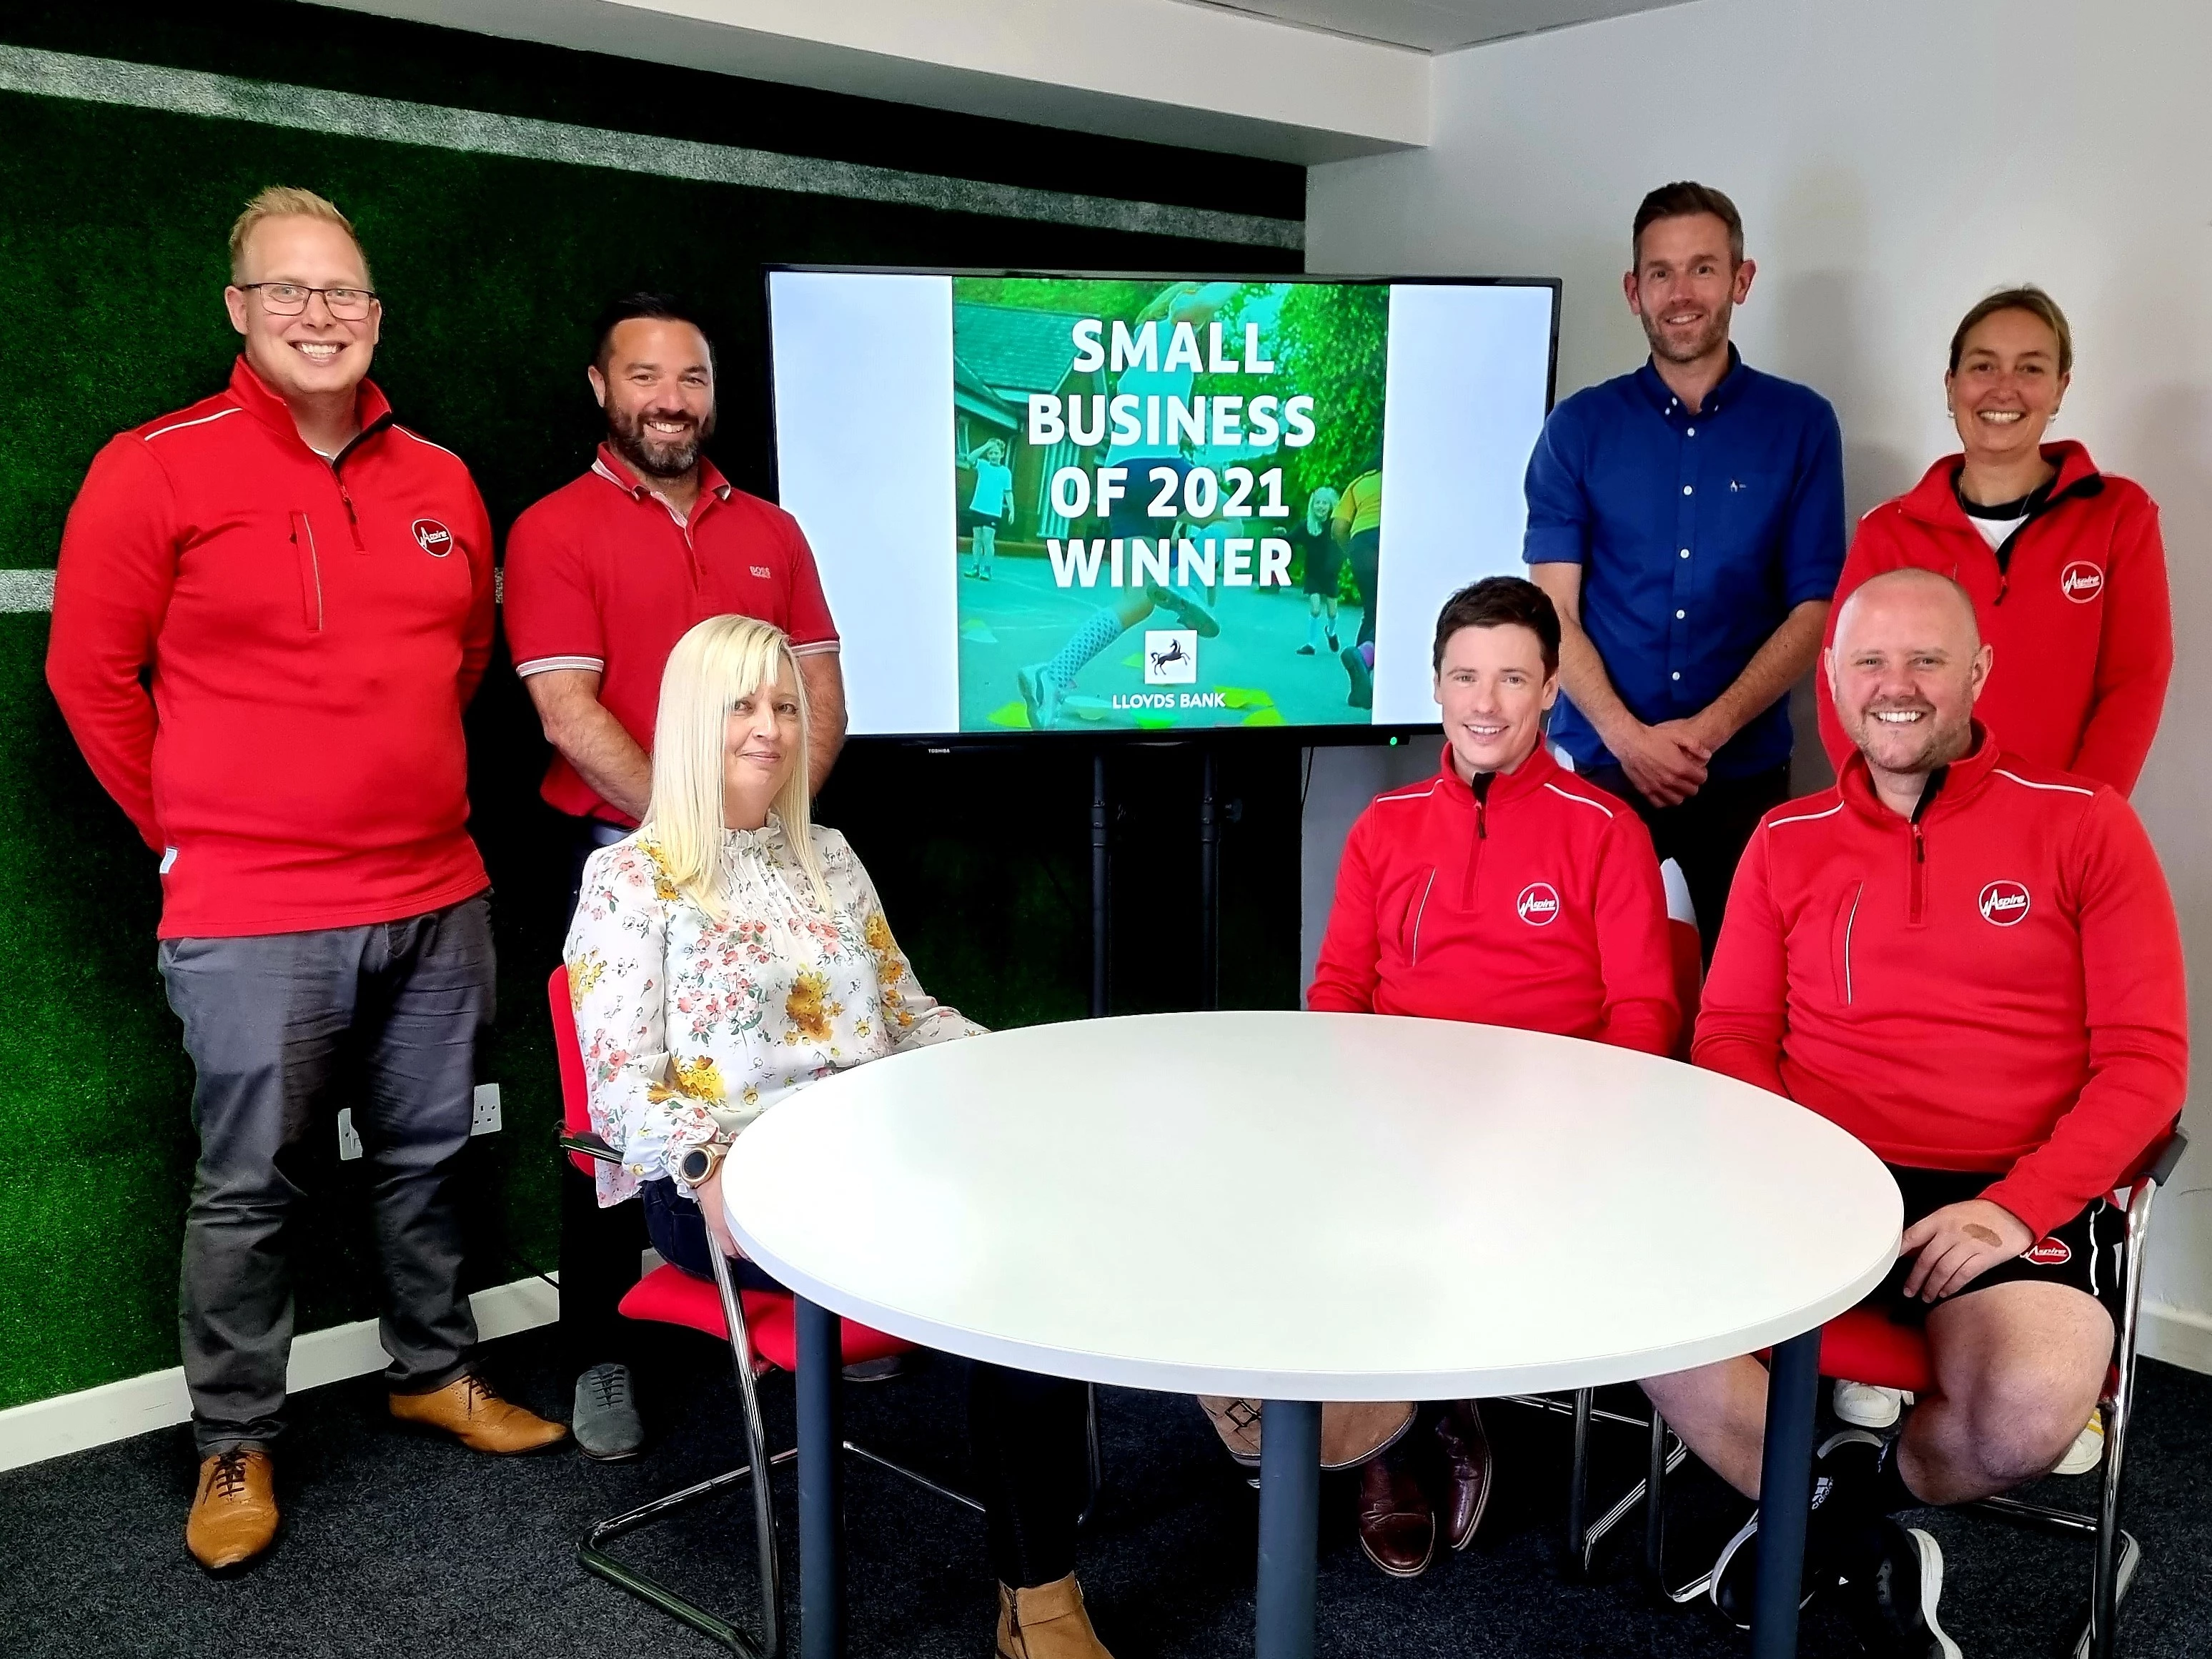 Aspire founders James Trowman (back second left) and Paul Griffiths (back second right) celebrate the Lloyds Bank Small Business of 2021 award win with the team